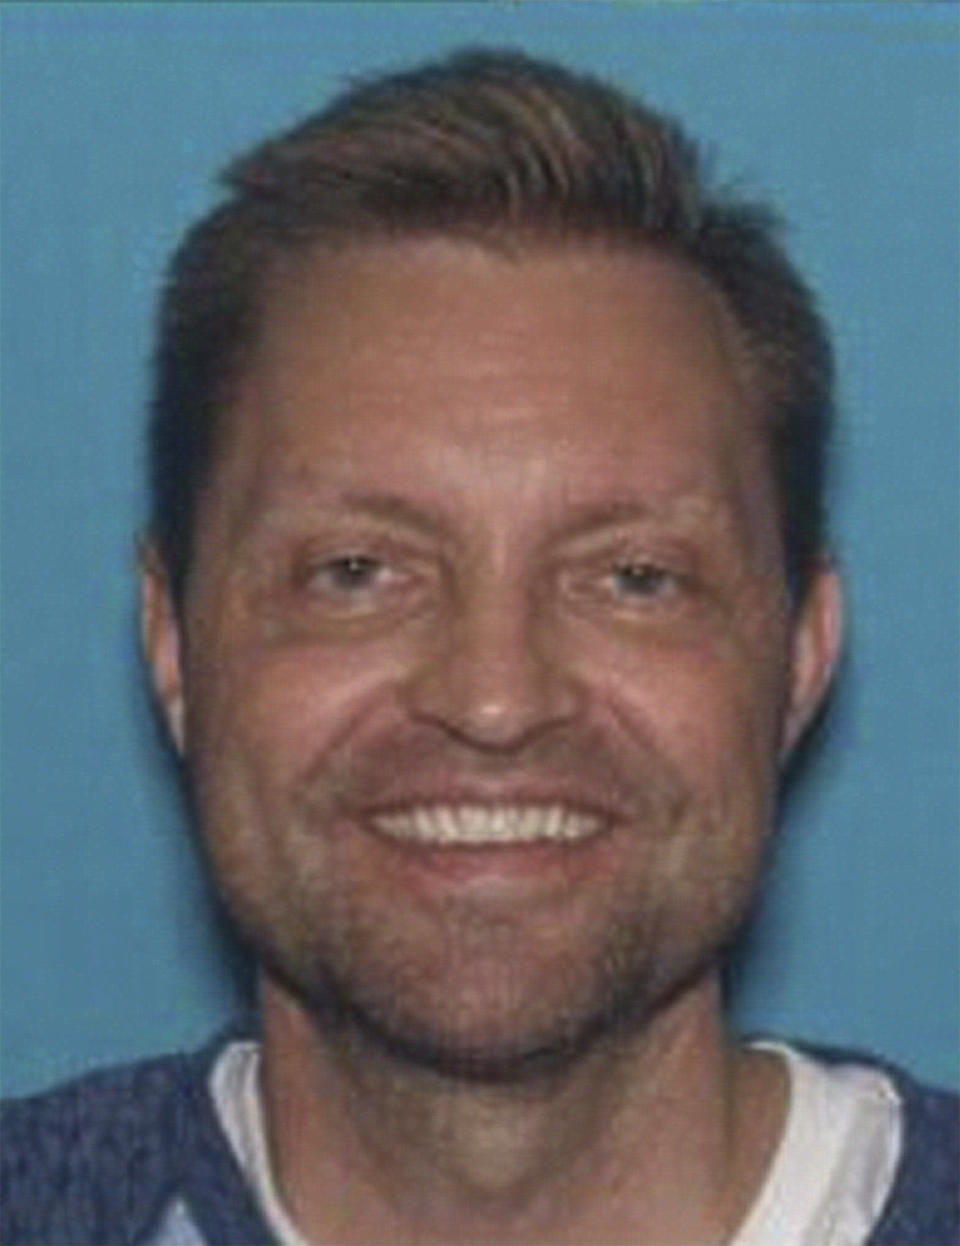 This undated photo released by the Cassville Missouri Police Dept., shows Dr. John Forsyth. Forsyth, a missing emergency room doctor from Missouri, was found dead in Arkansas from an apparent gunshot wound, authorities confirmed Wednesday, May 31, 2023, but they're still investigating what happened in the week since he was last seen. (Cassville Missouri Police via AP)